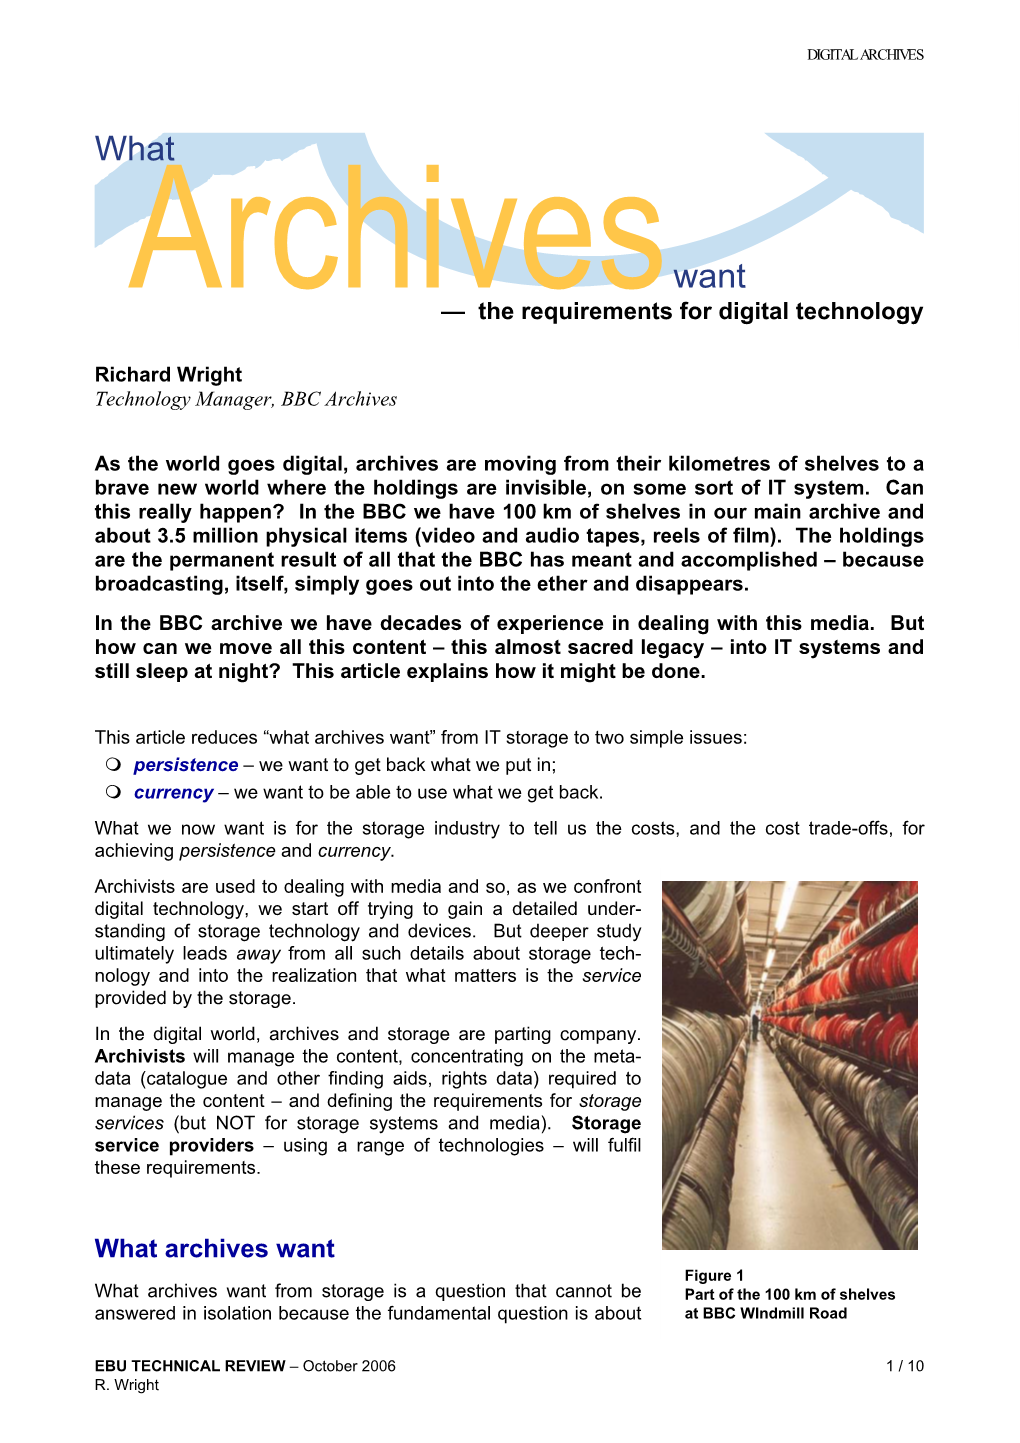 What Archives Want” from IT Storage to Two Simple Issues:  Persistence – We Want to Get Back What We Put In;  Currency – We Want to Be Able to Use What We Get Back